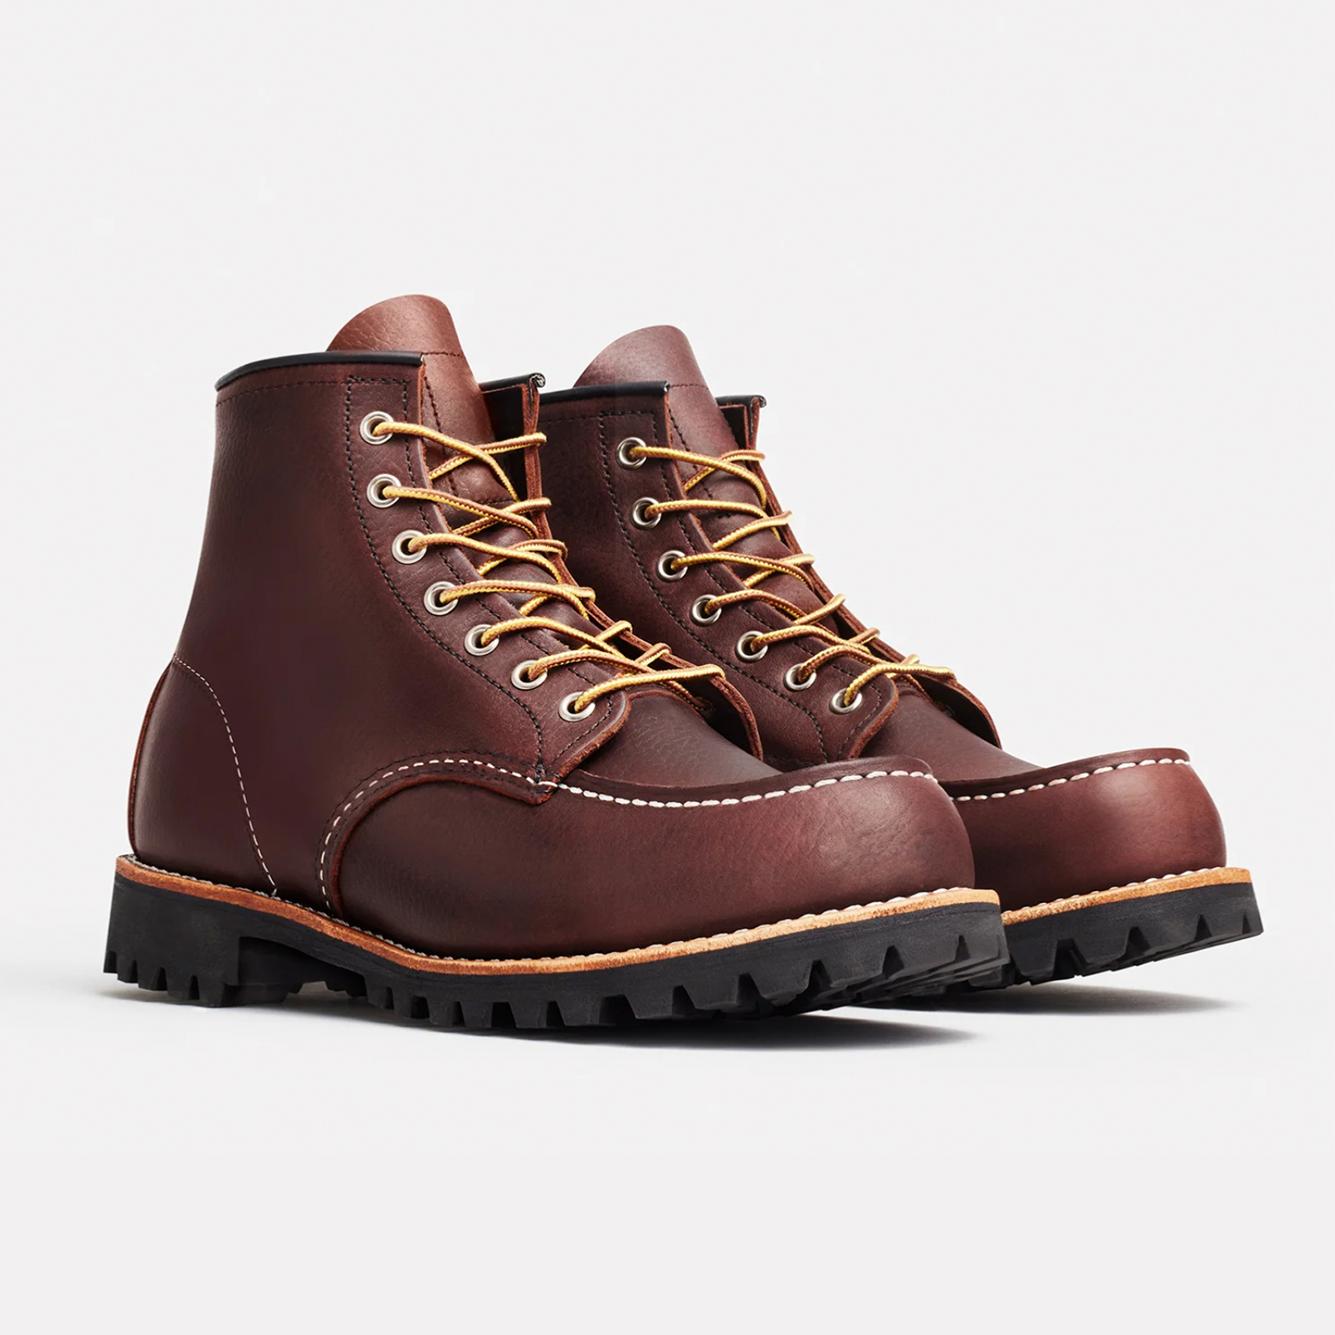 RED WING 8146